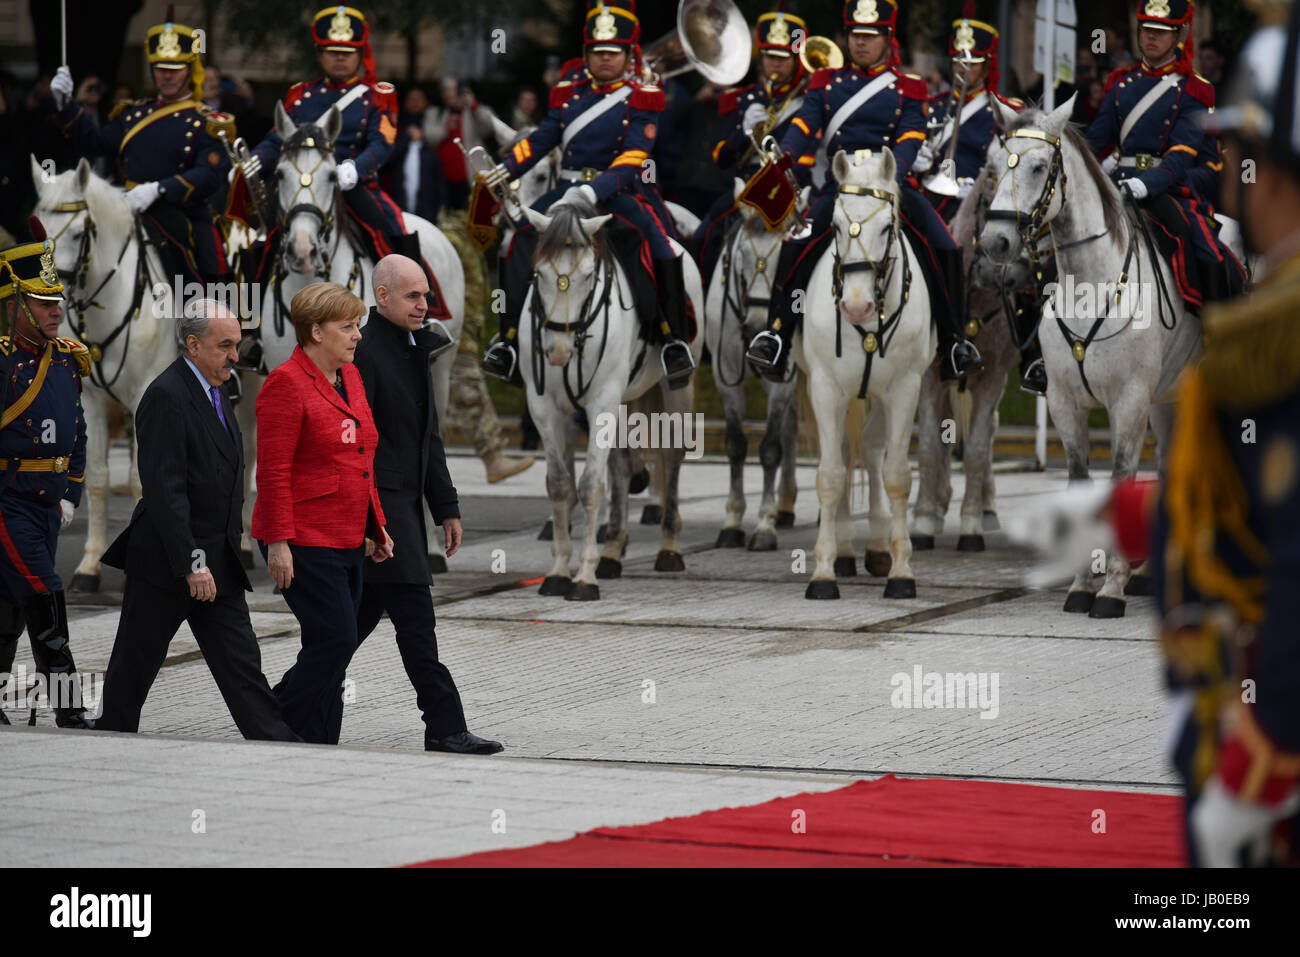 Buenos Aires, Argentina. 8th June, 2017. Chancellor of Germany Angela Merkel (C), the Mayor of Buenos Aires Horacio Rodriguez Larreta (R) and the Vice Minister of foreign affairs Pedro Villagra Delgado (L) during a wreath-laying ceremony at the Plaza San Martin square in Buenos Aires, Argentina. Credit: Anton Velikzhanin/Alamy Live News Stock Photo